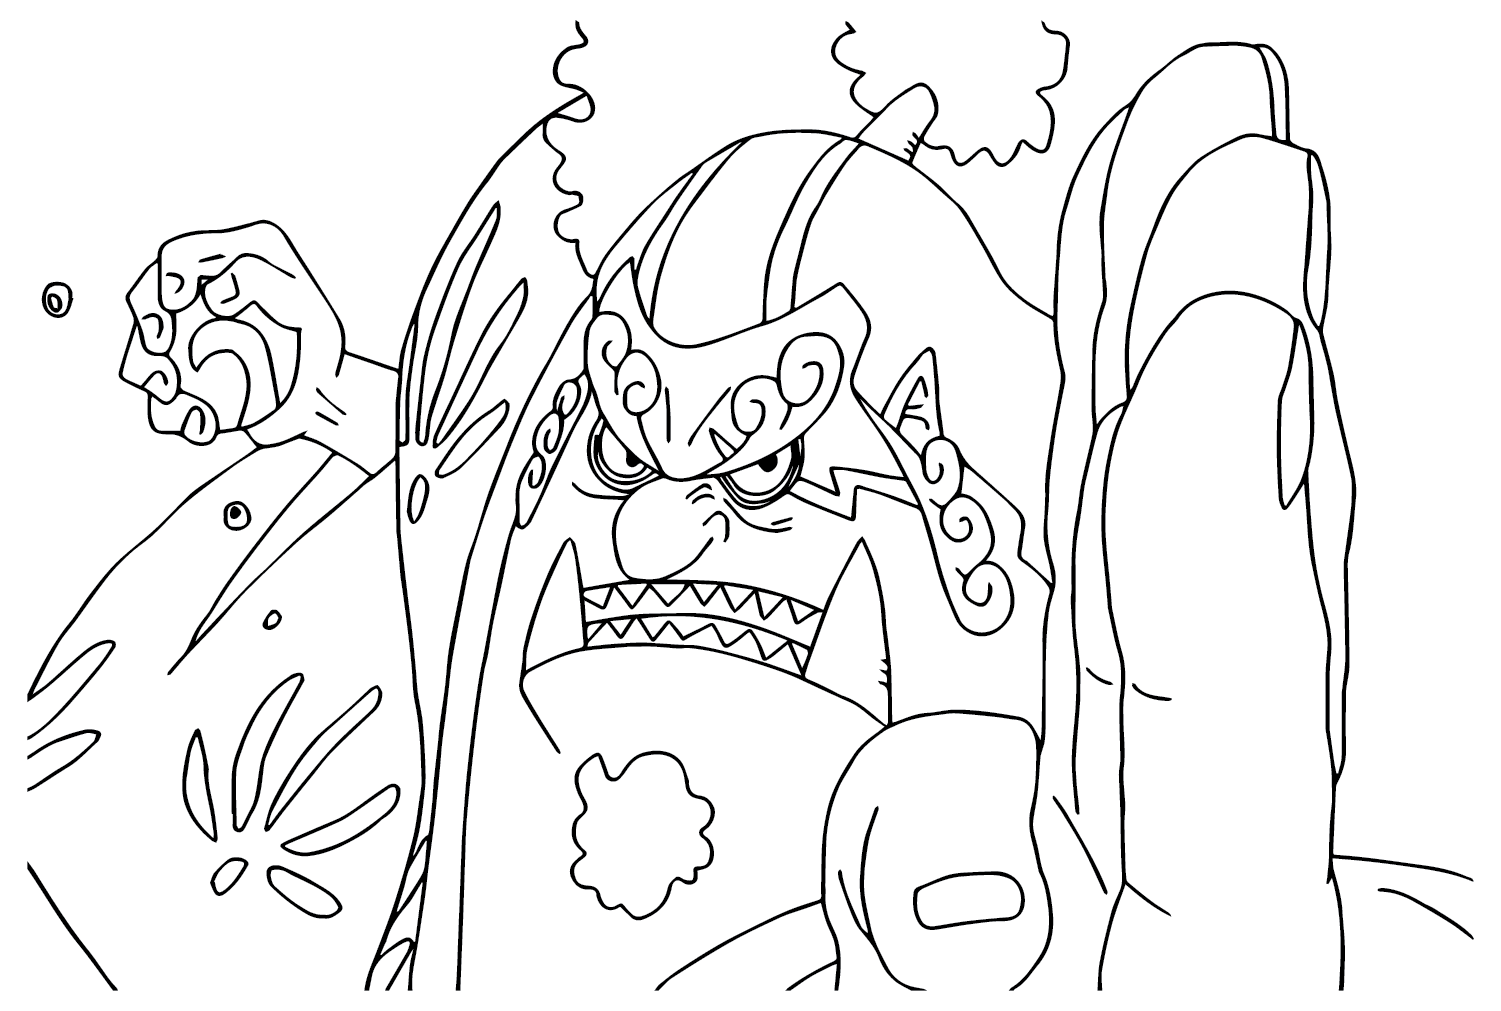 Jinbei Images to Color from Jinbe